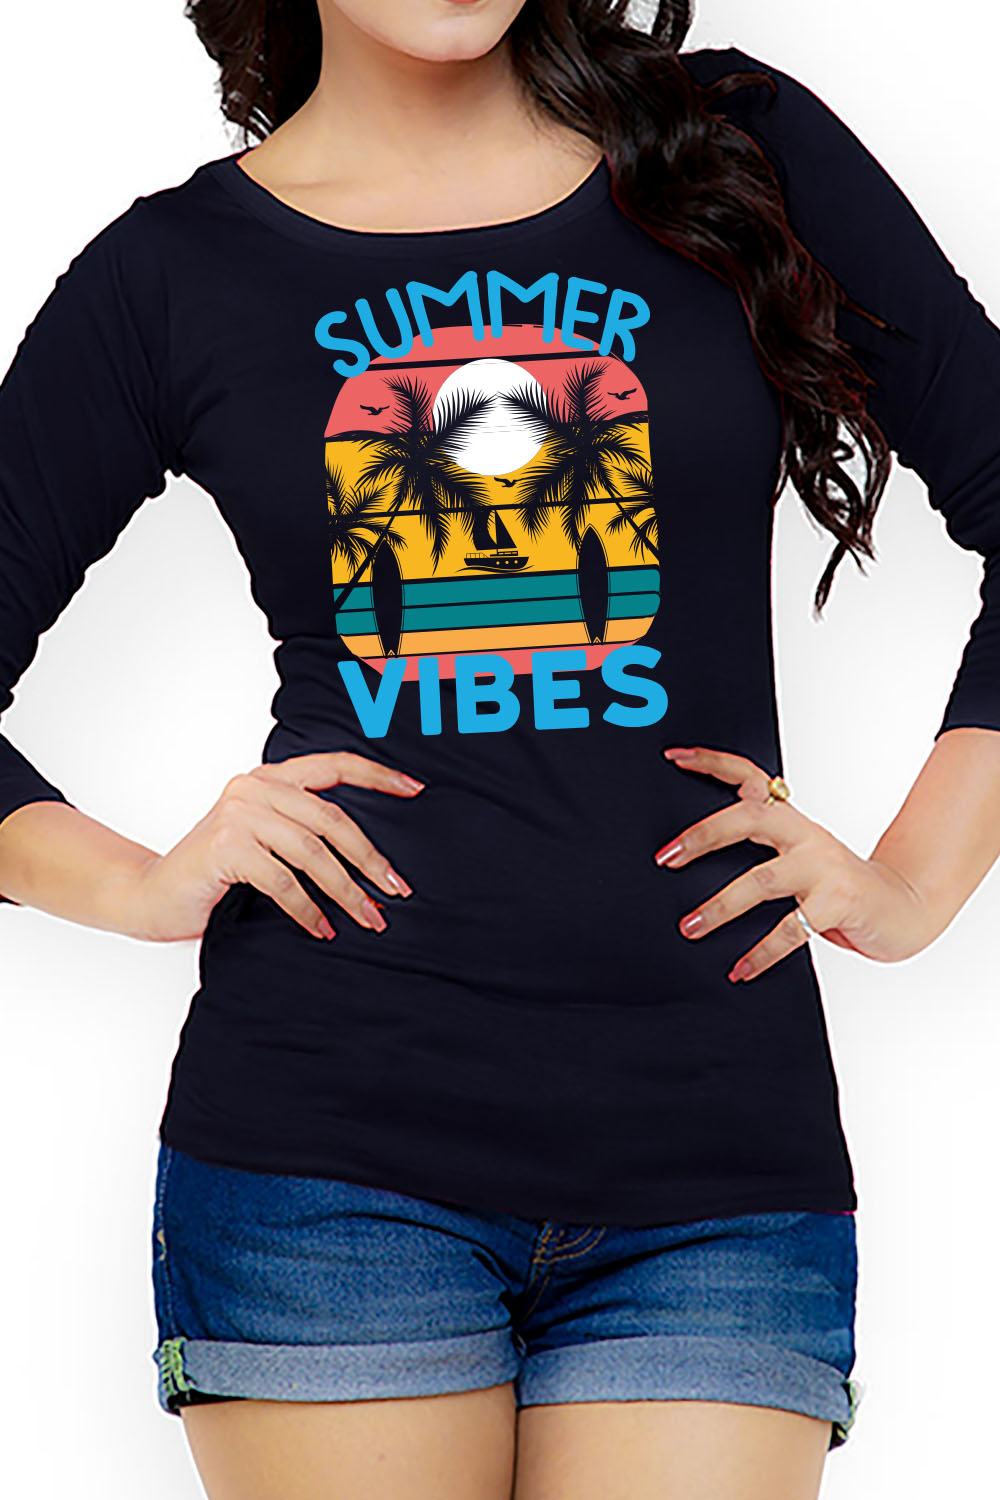 Summer Vibes SVG Bundle Cut File, Beach Life Svg, Hello Summer Svg, Summer Saying Svg, Salty Vibes, Summer Love, Vacation, Summer Vibes t shirt, Summer Quotes, Typography Design, pinterest preview image.